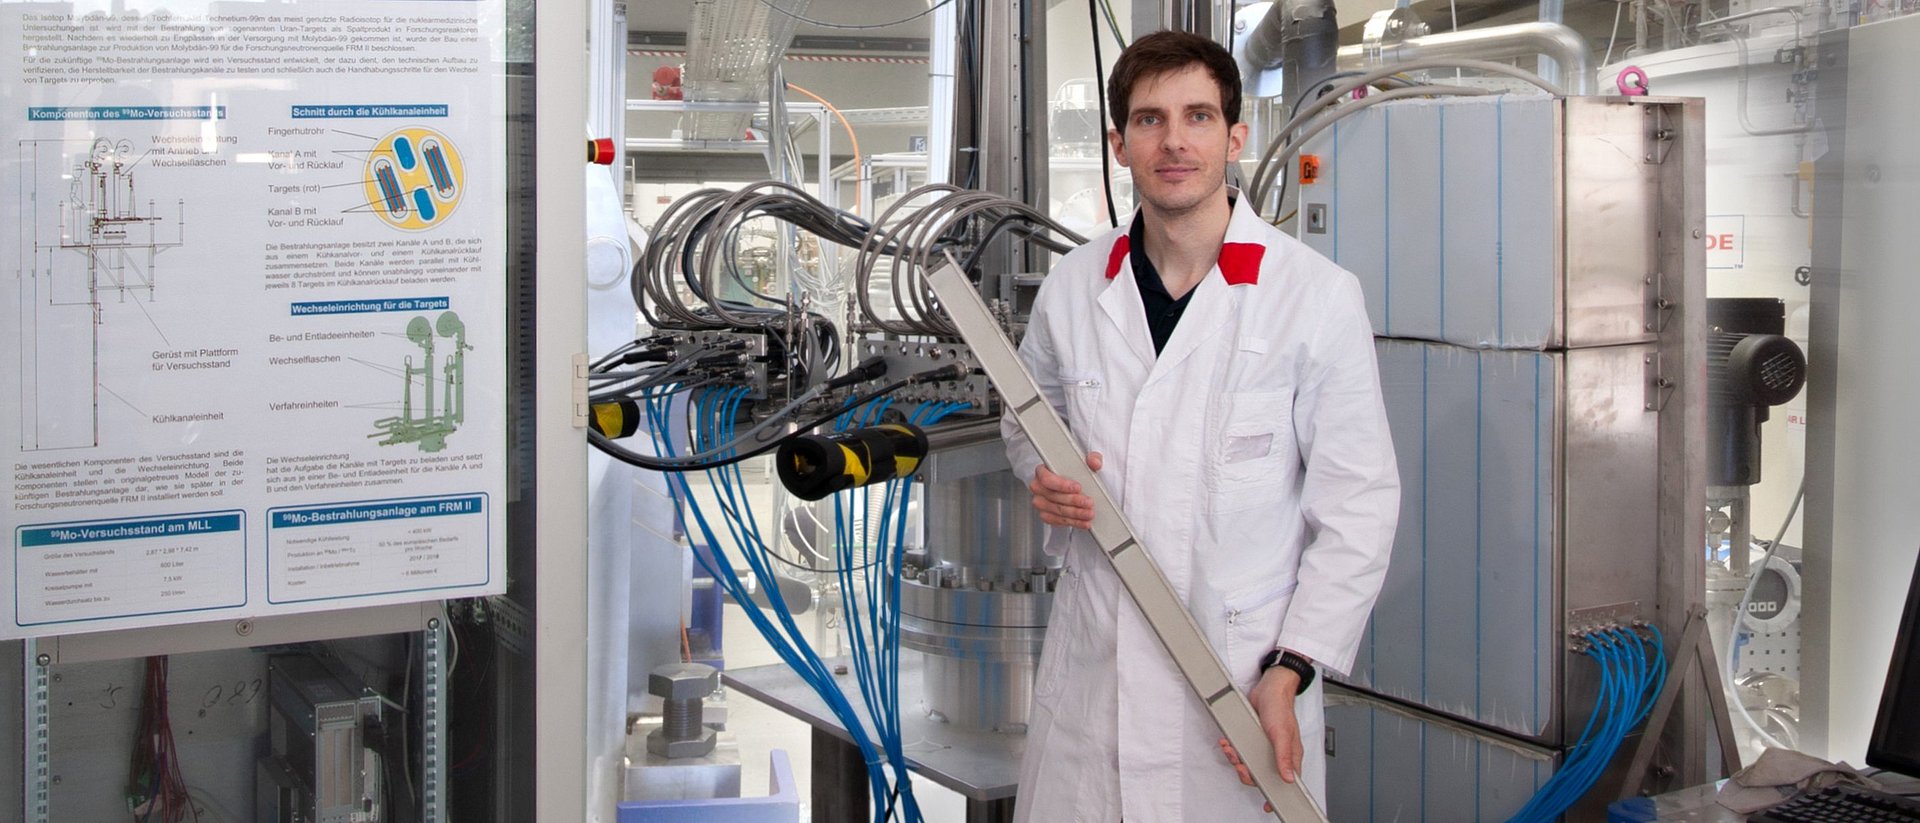 Dr. Tobias Chemnitz at the test facility for Mo-99 production at FRM II at the Garching reserach campus.